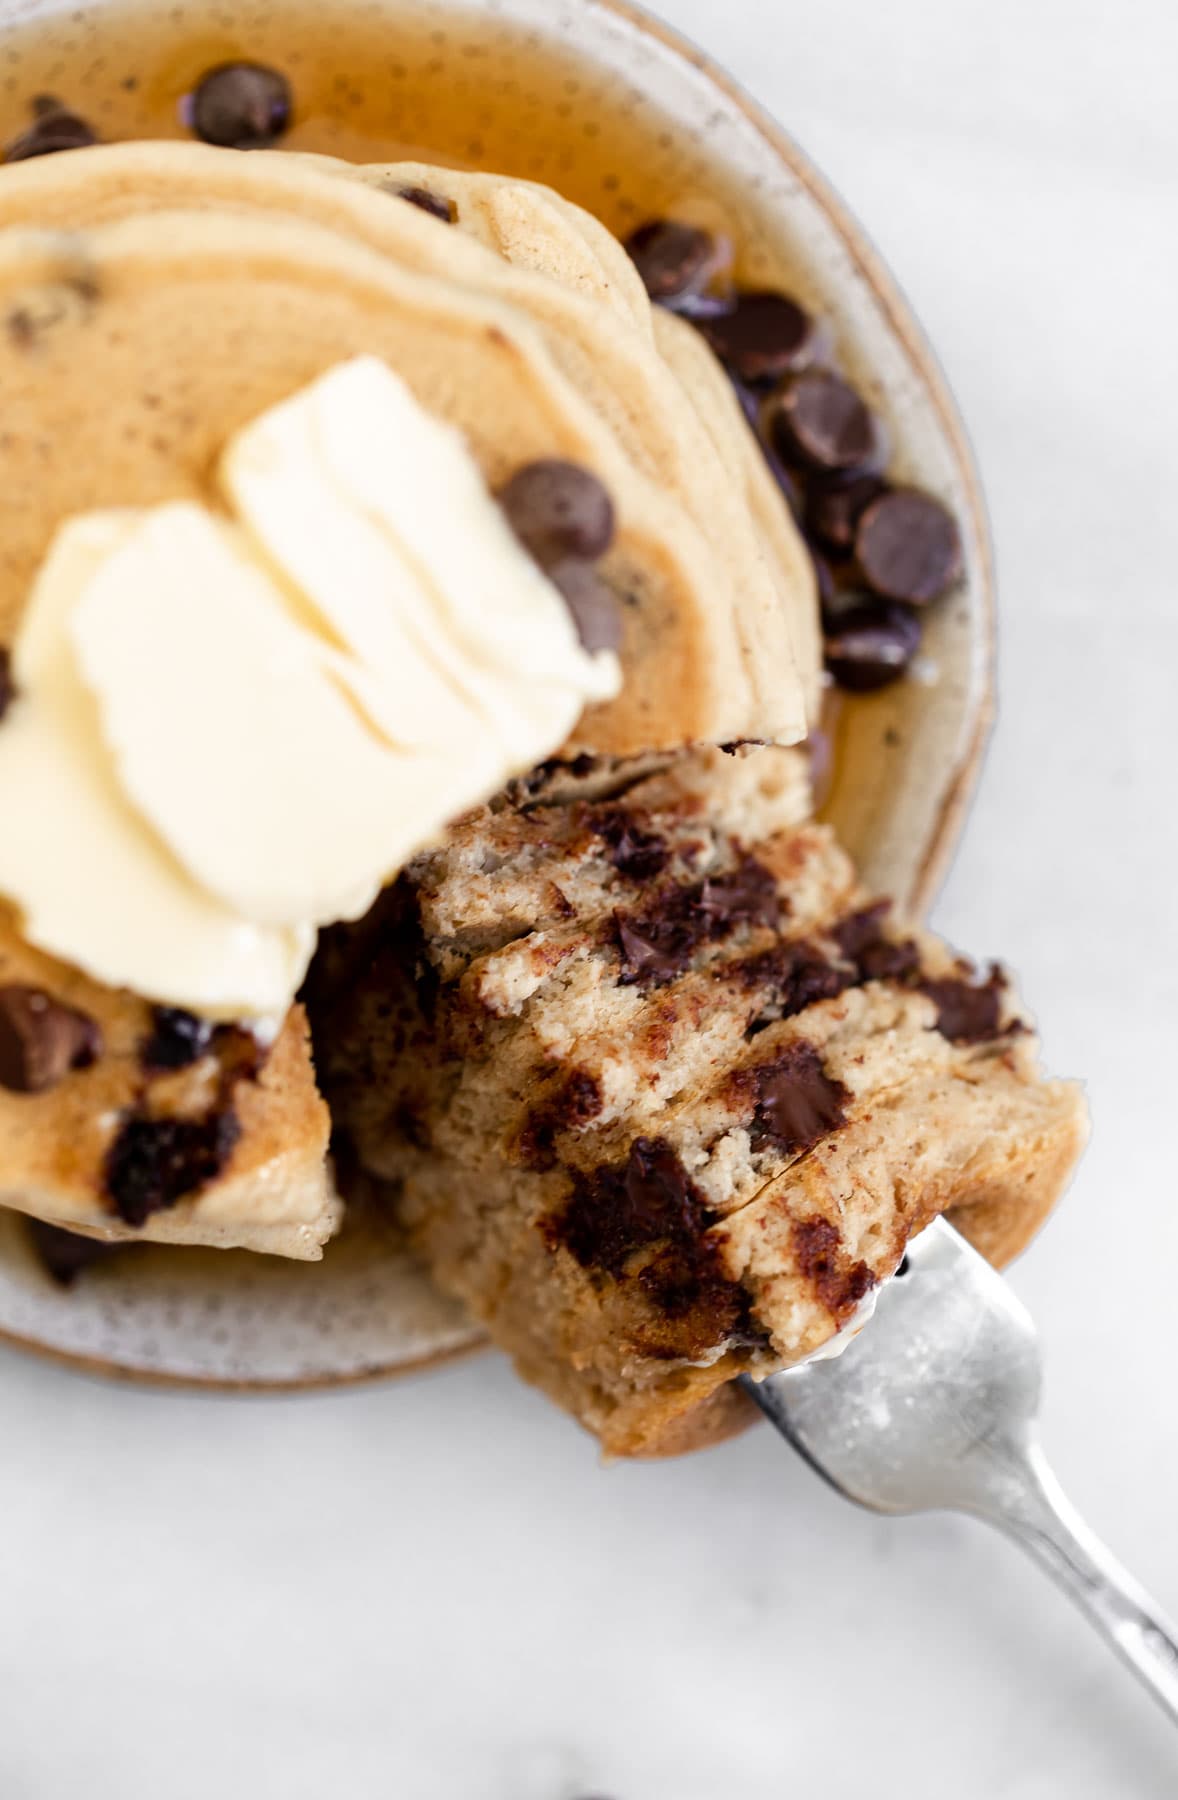 Gluten free chocolate chip pancakes with a bite taken out to show the texture.